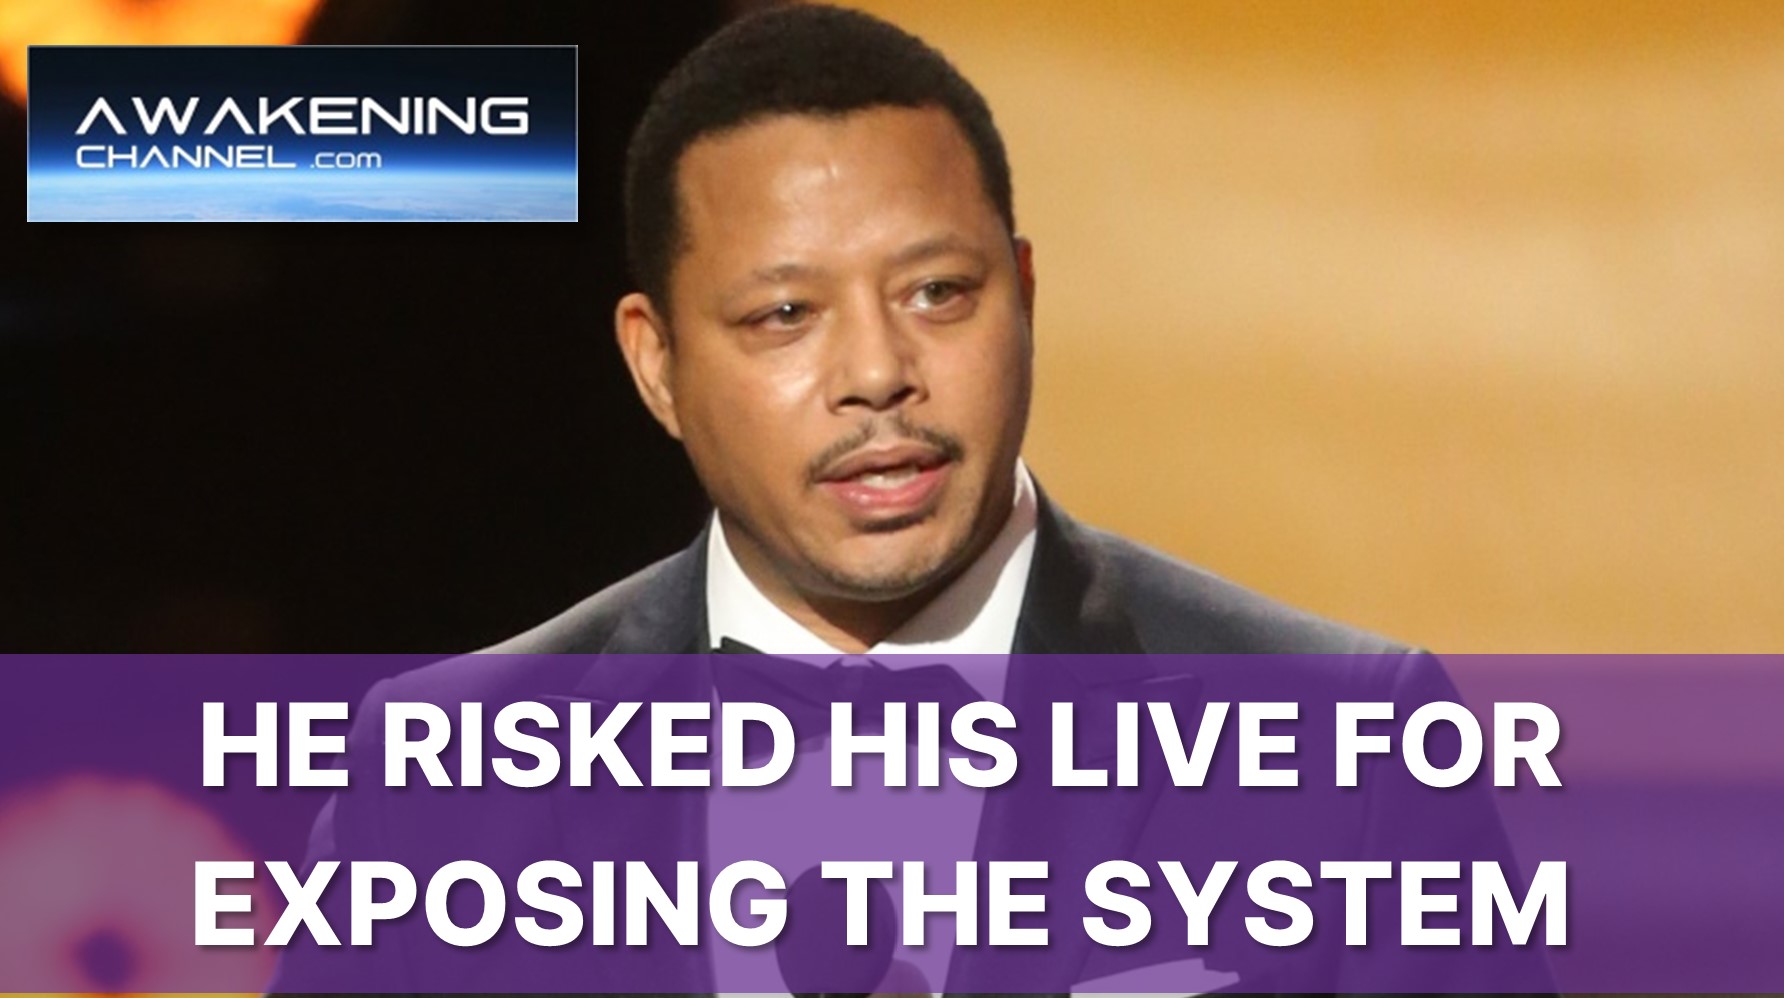 Terrence Howard Risked His Life For Exposing This.